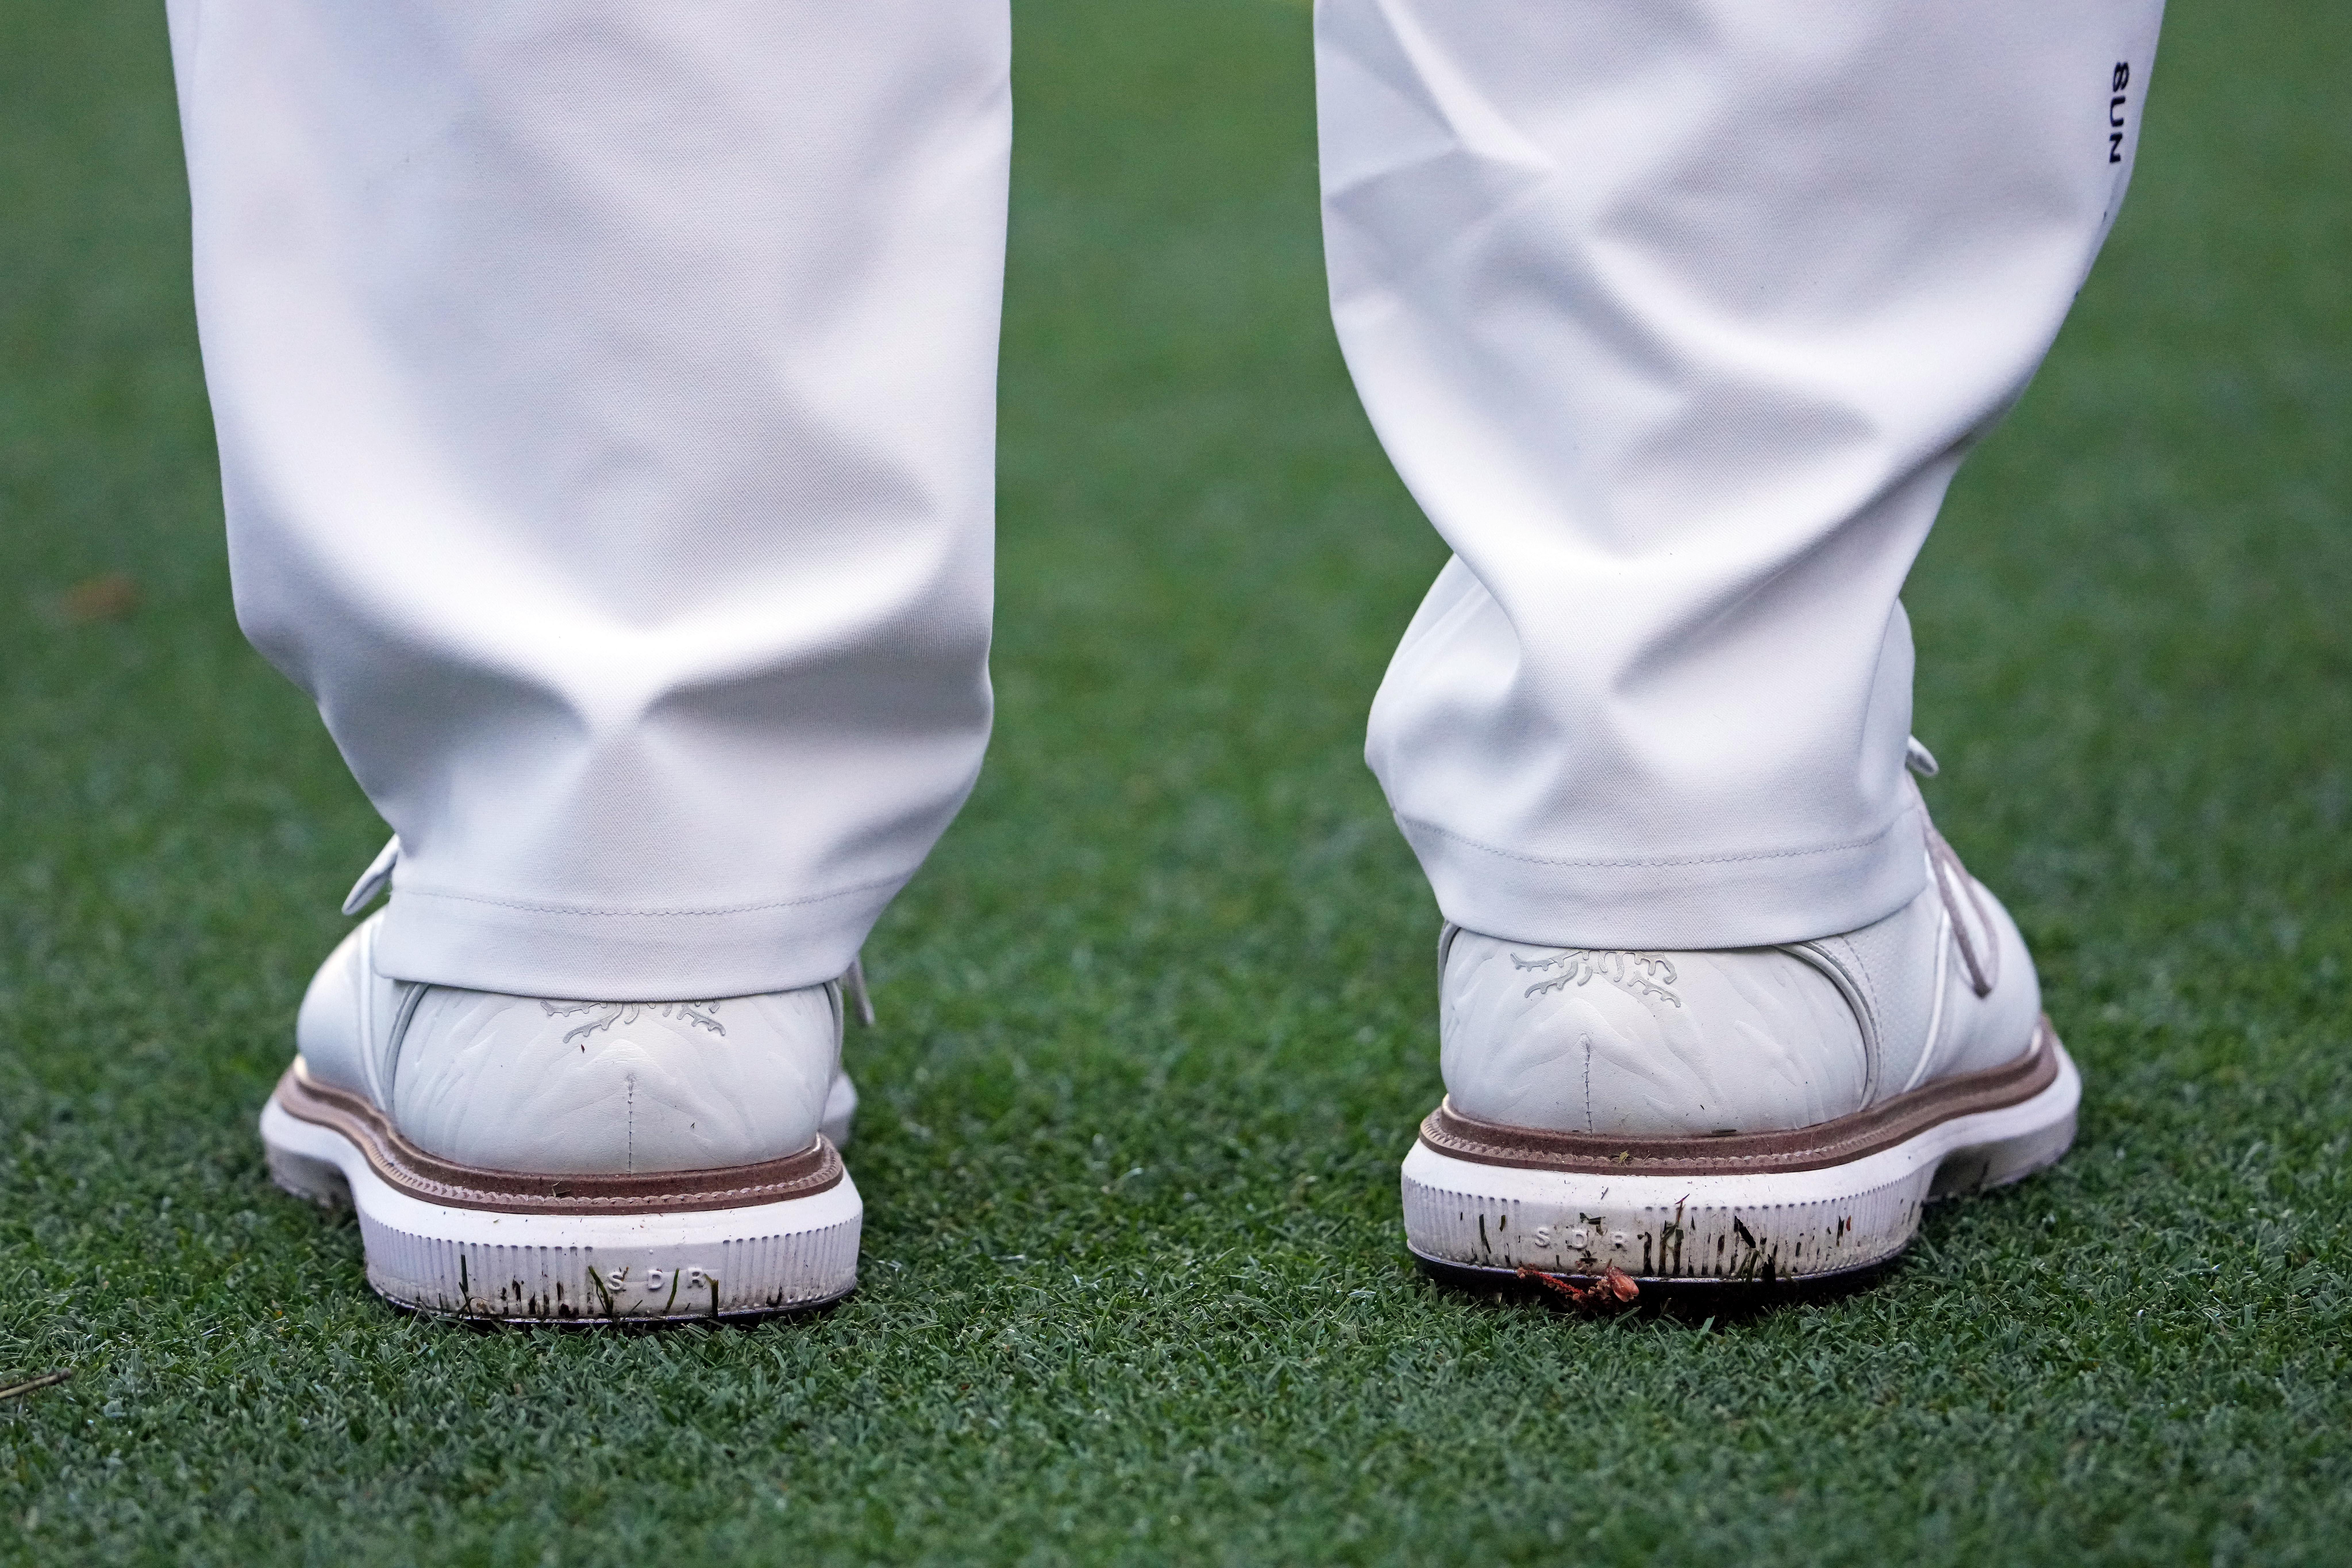 The heels of Tiger Woods' white golf shoes.